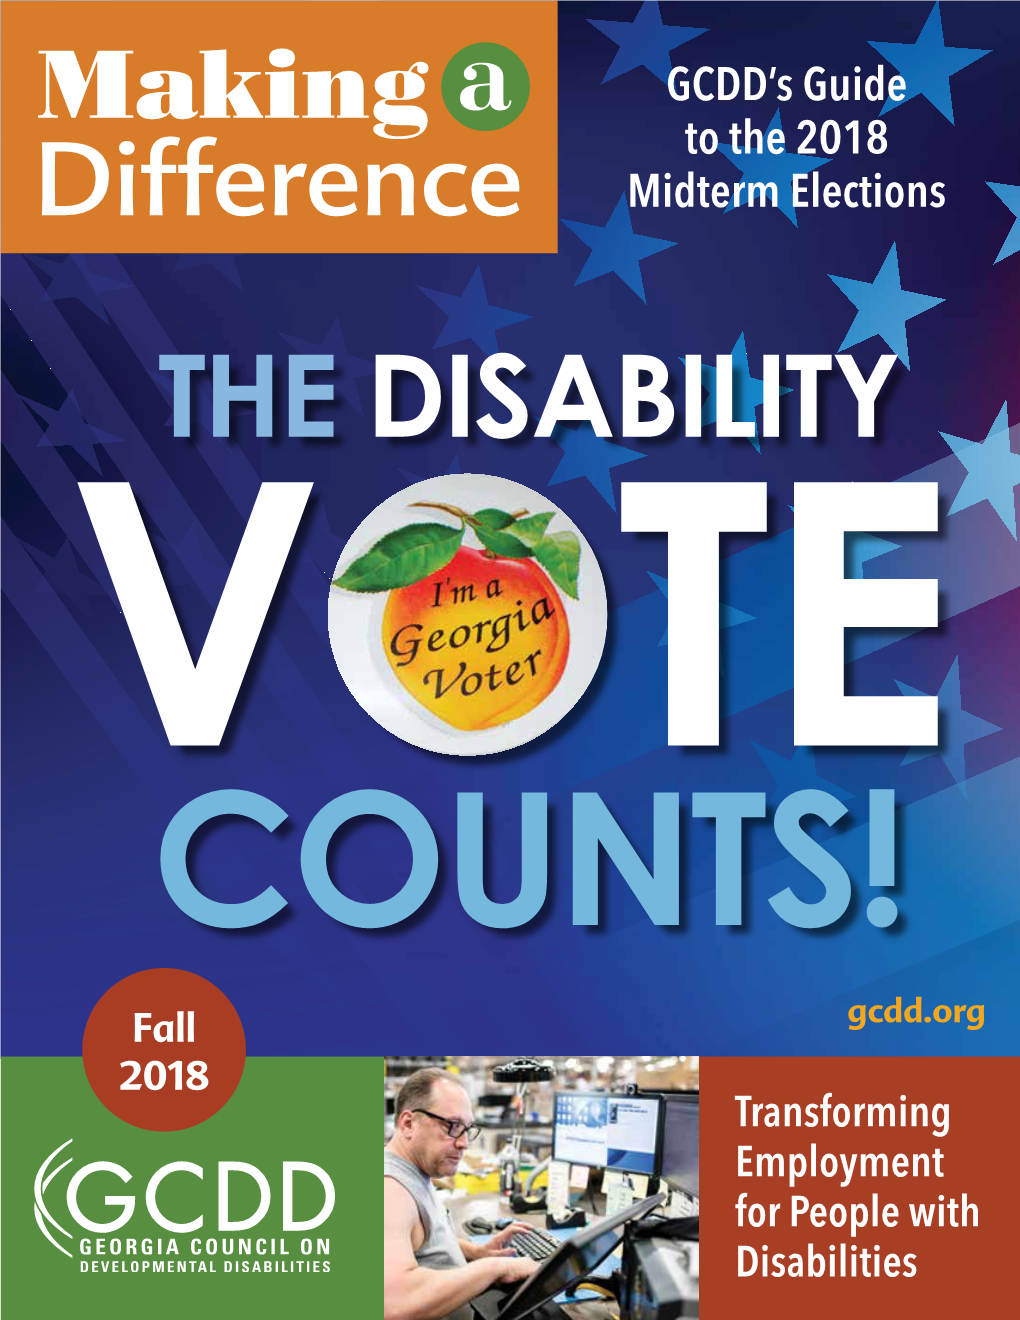 Difference Midterm Elections the DISABILITY